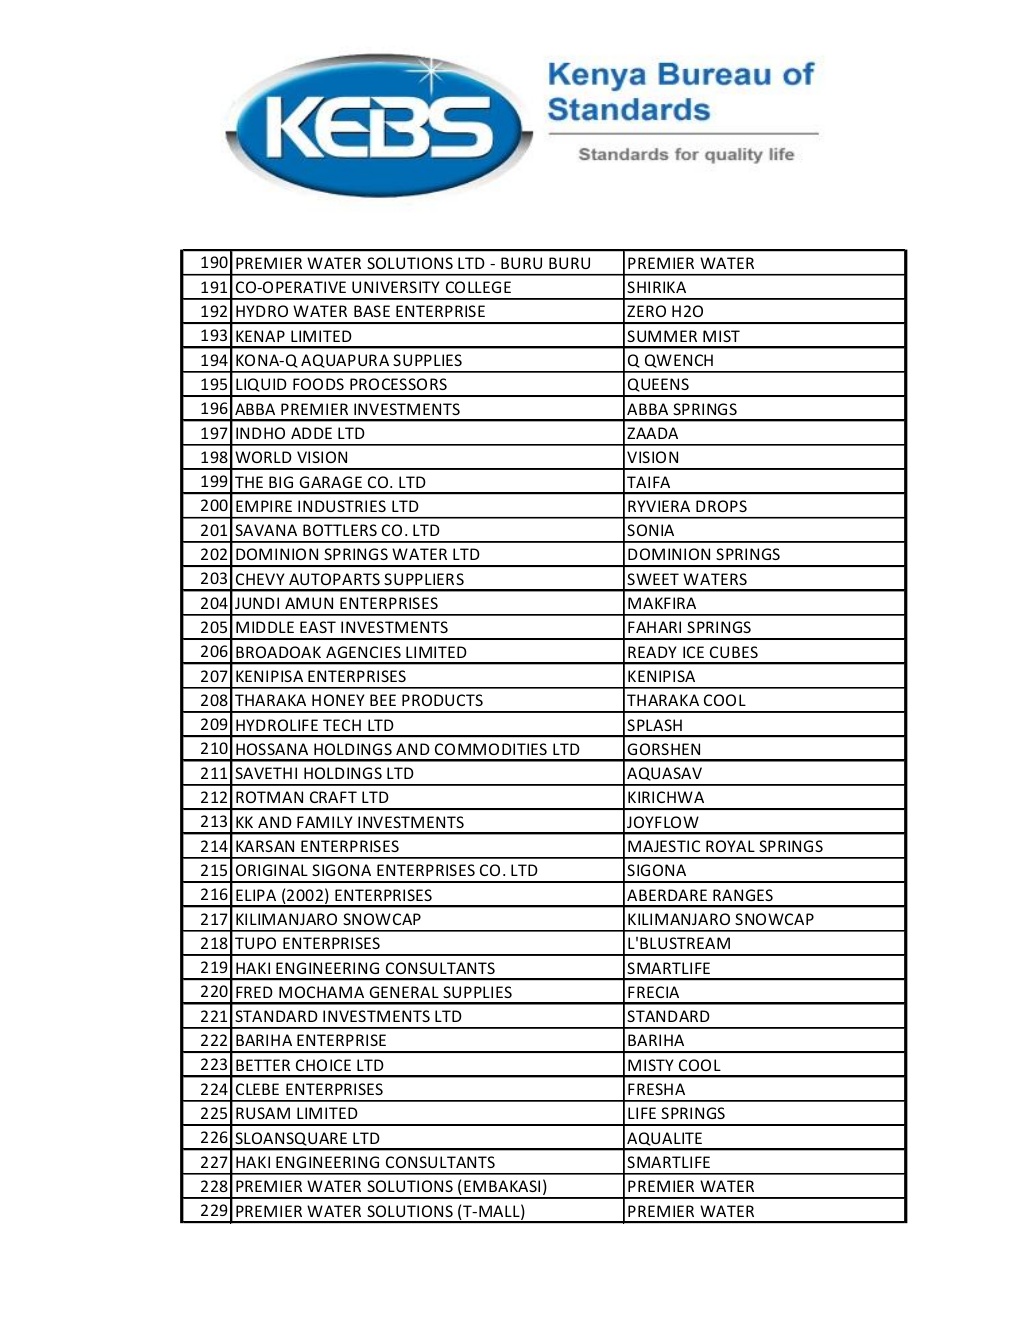 list-of-368-water-brands-banned-by-kebs-6-1024